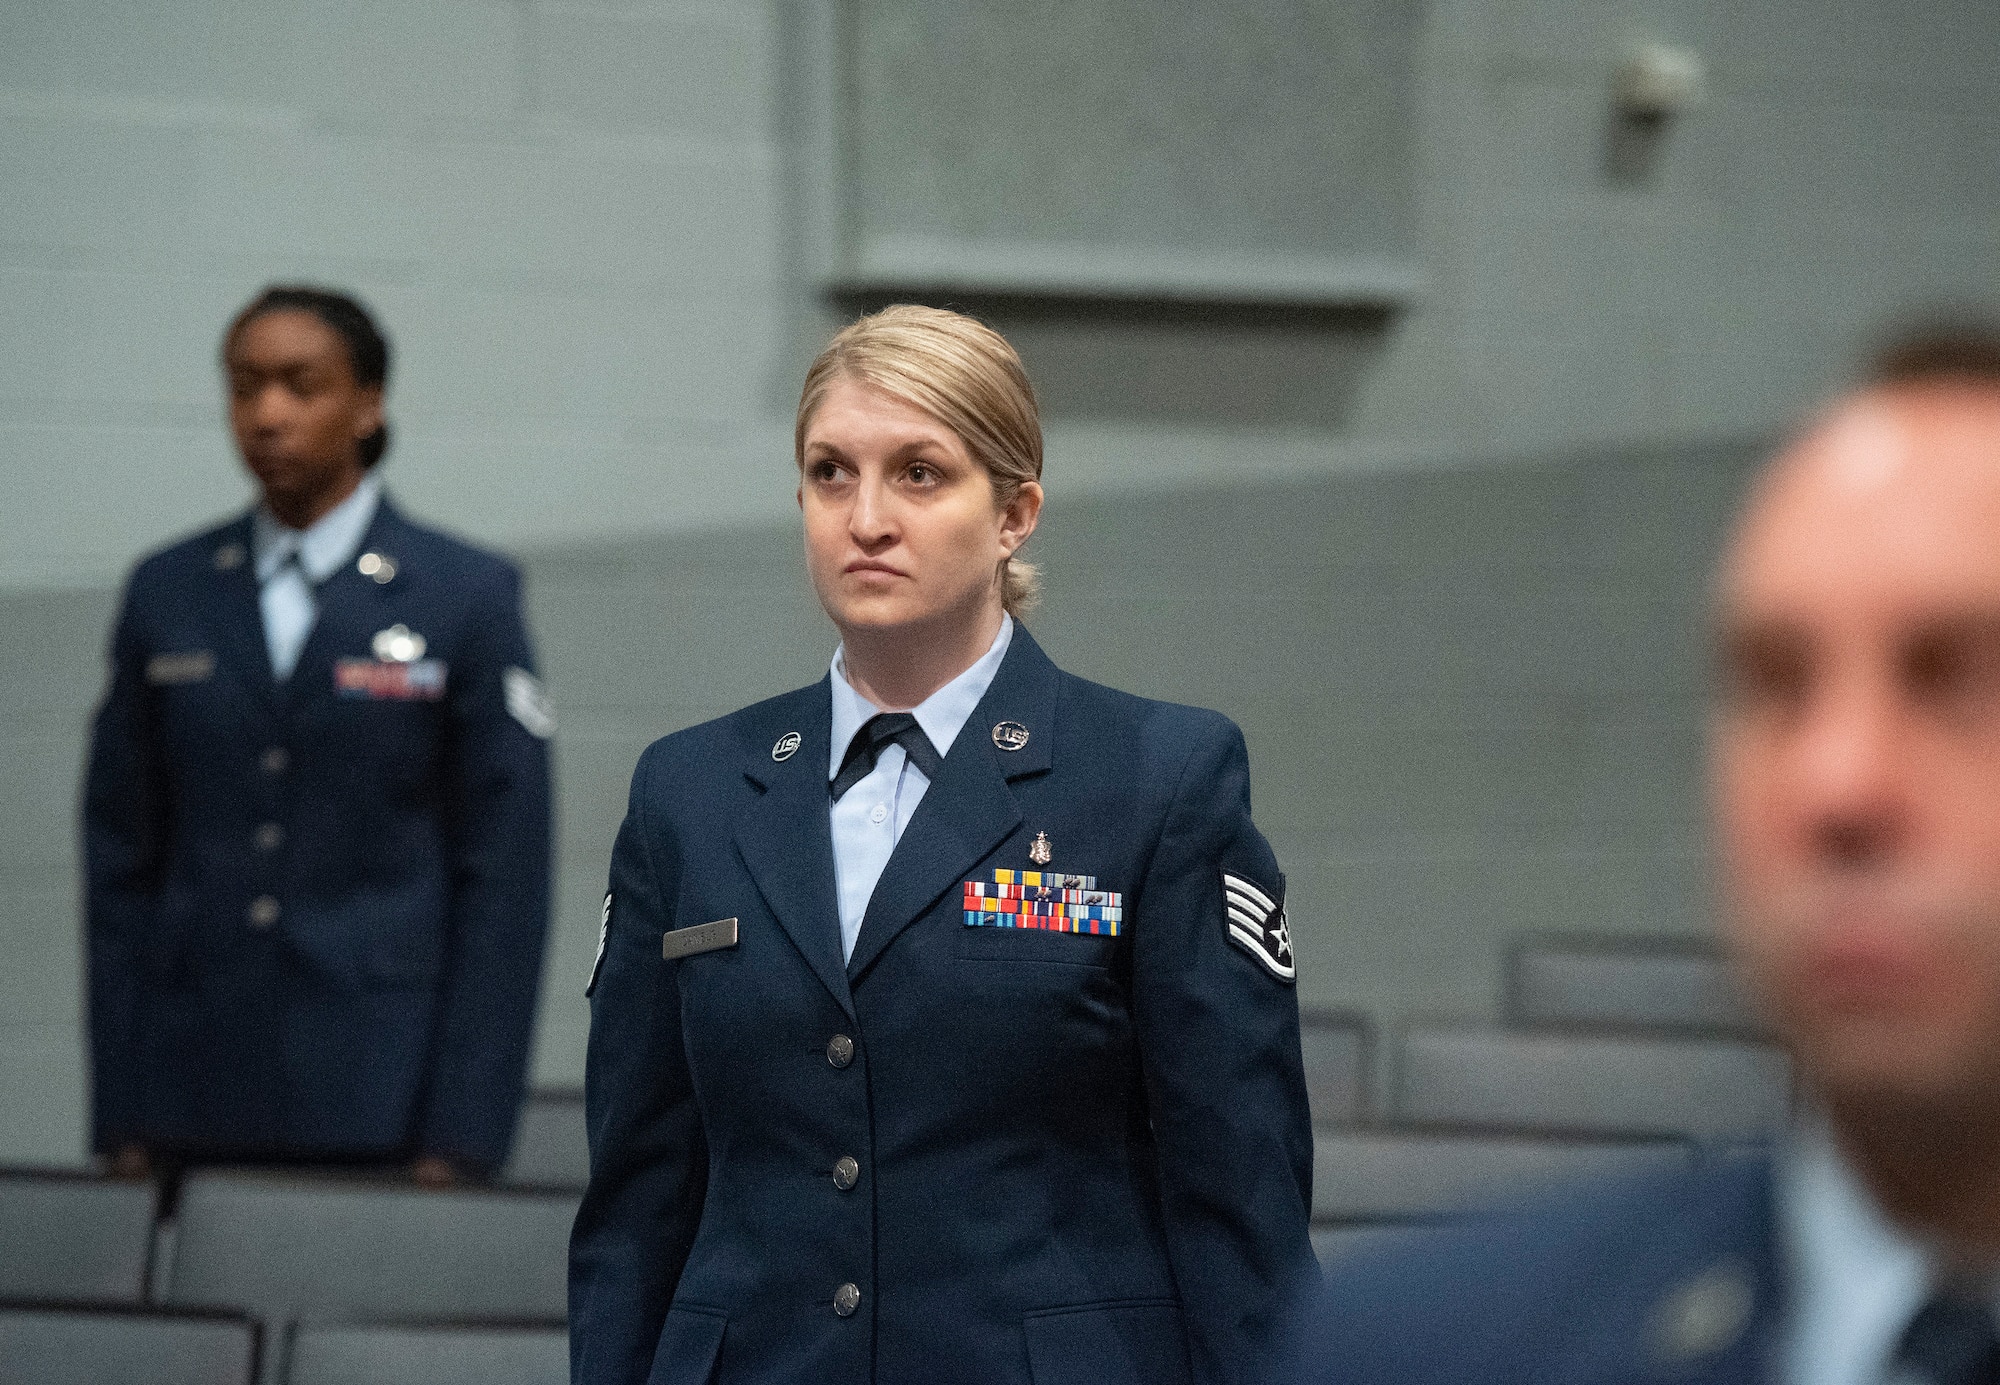 Staff Sgt. Victoria Daniels, U.S. Air Force School of Aerospace Medicine, stands with classmates as their degrees are conferred during the Community College of the Air Force spring graduation ceremony May 26, 2021, in the theater at Wright-Patterson Air Force Base, Ohio. Daniels earned an associate’s degree in instruction of technology and military science. (U.S. Air Force photo by R.J. Oriez)